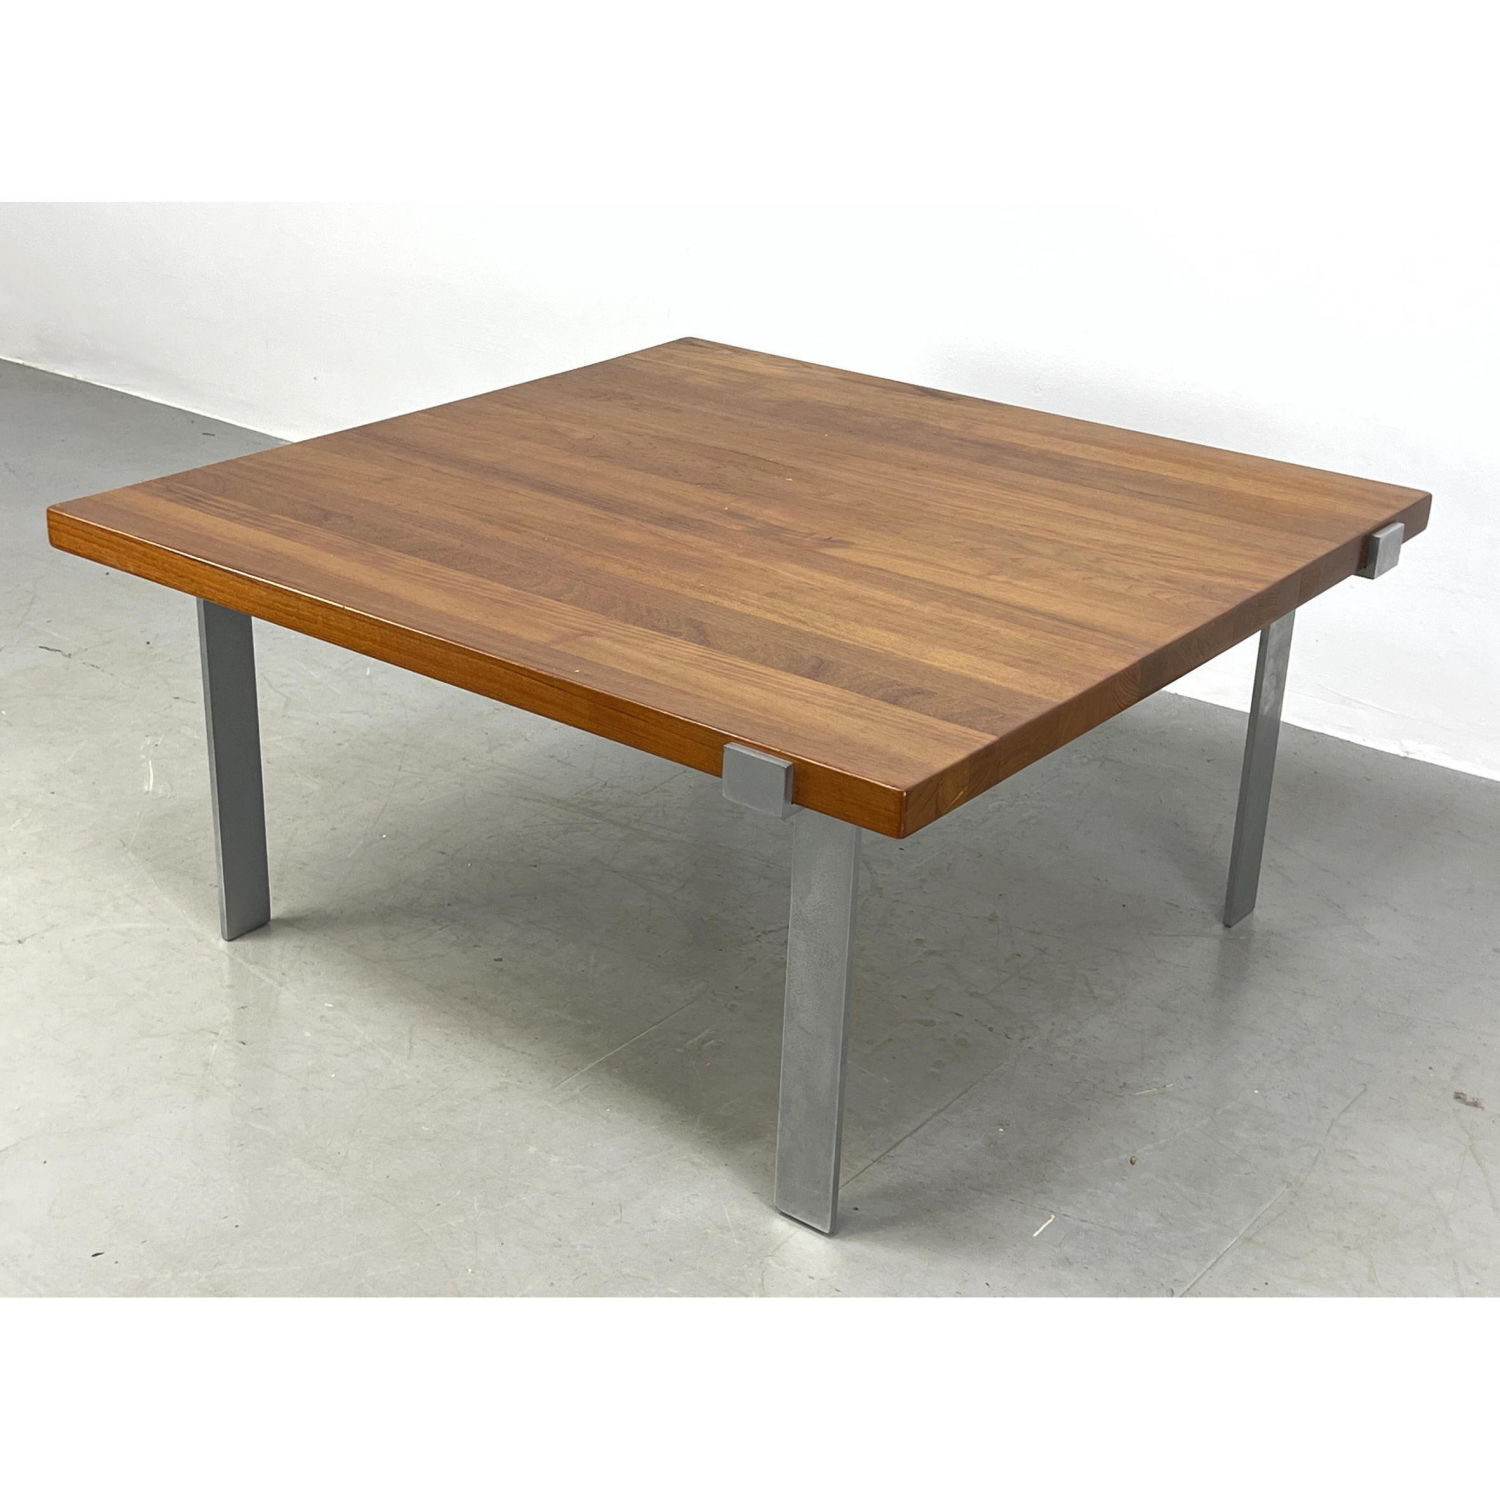 ILLUM WIKKELSO Coffee table with